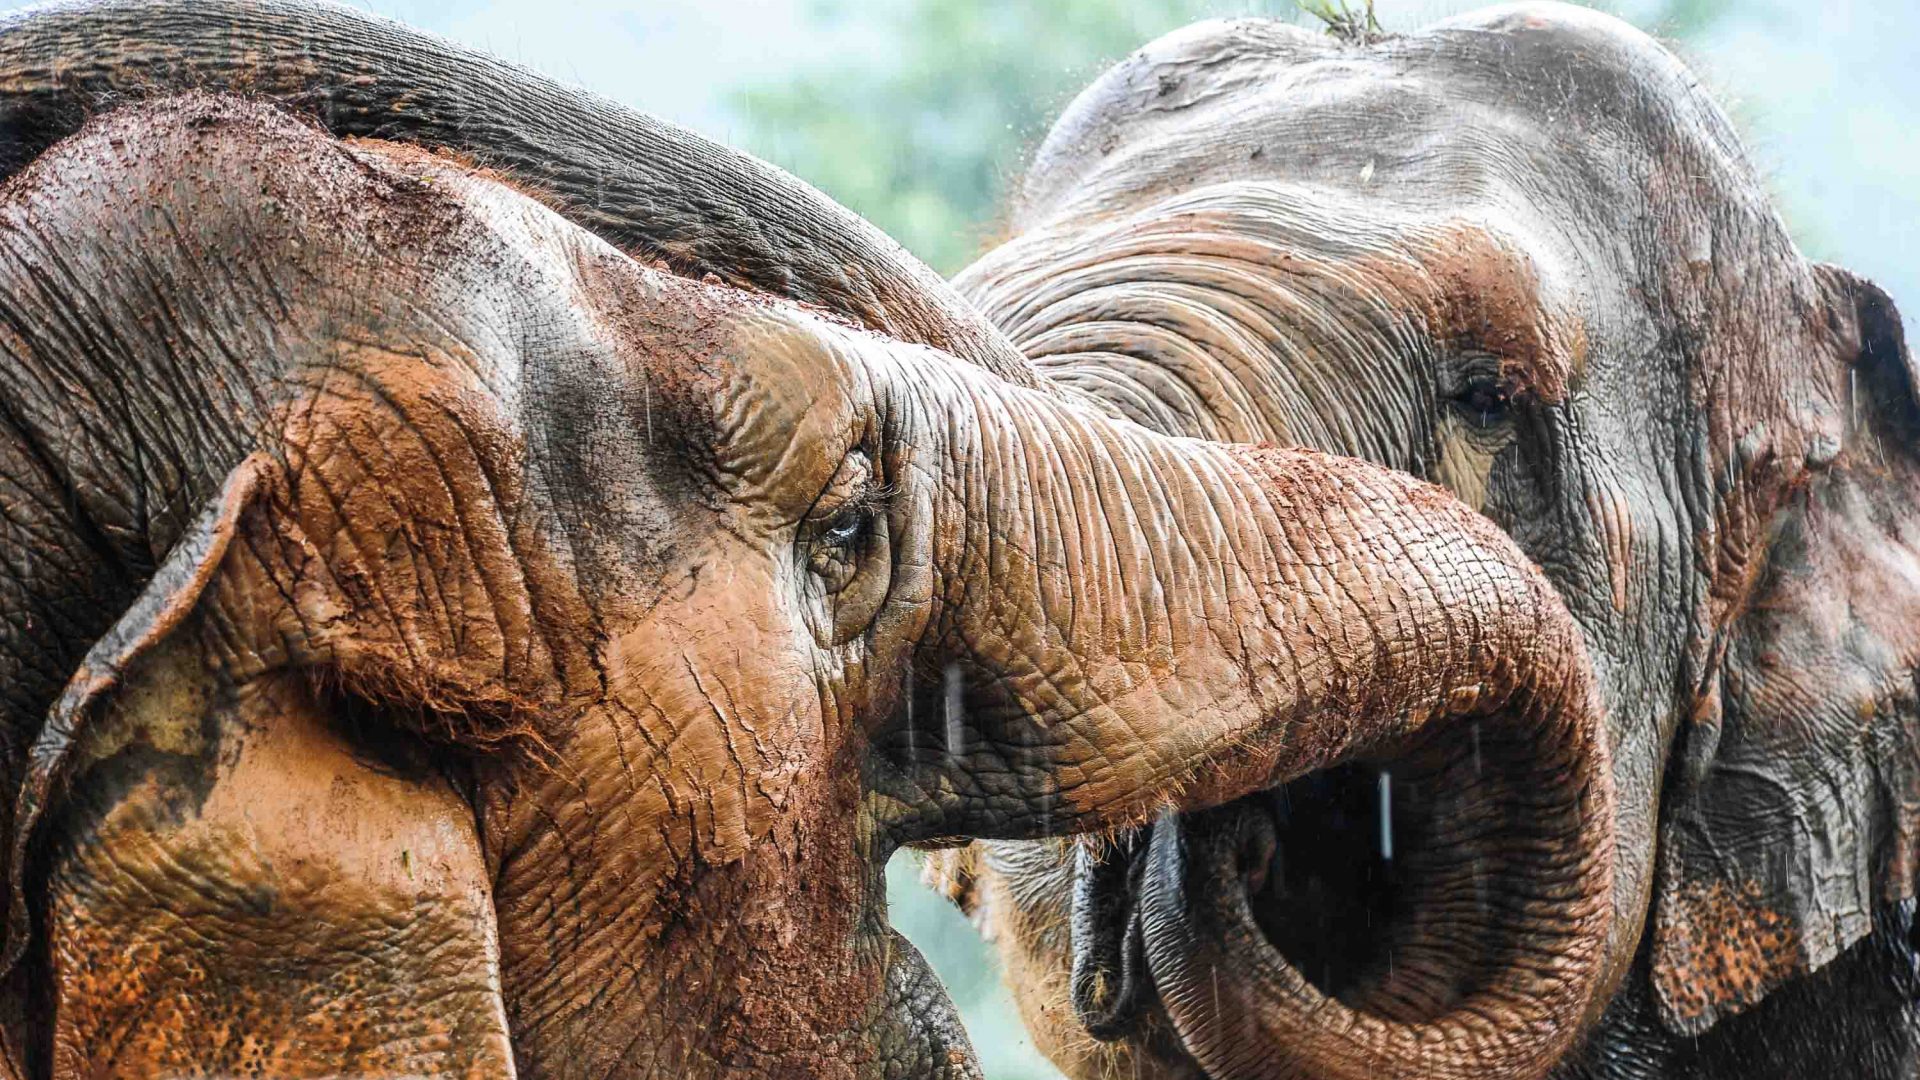 Two elephants bring their faces together.